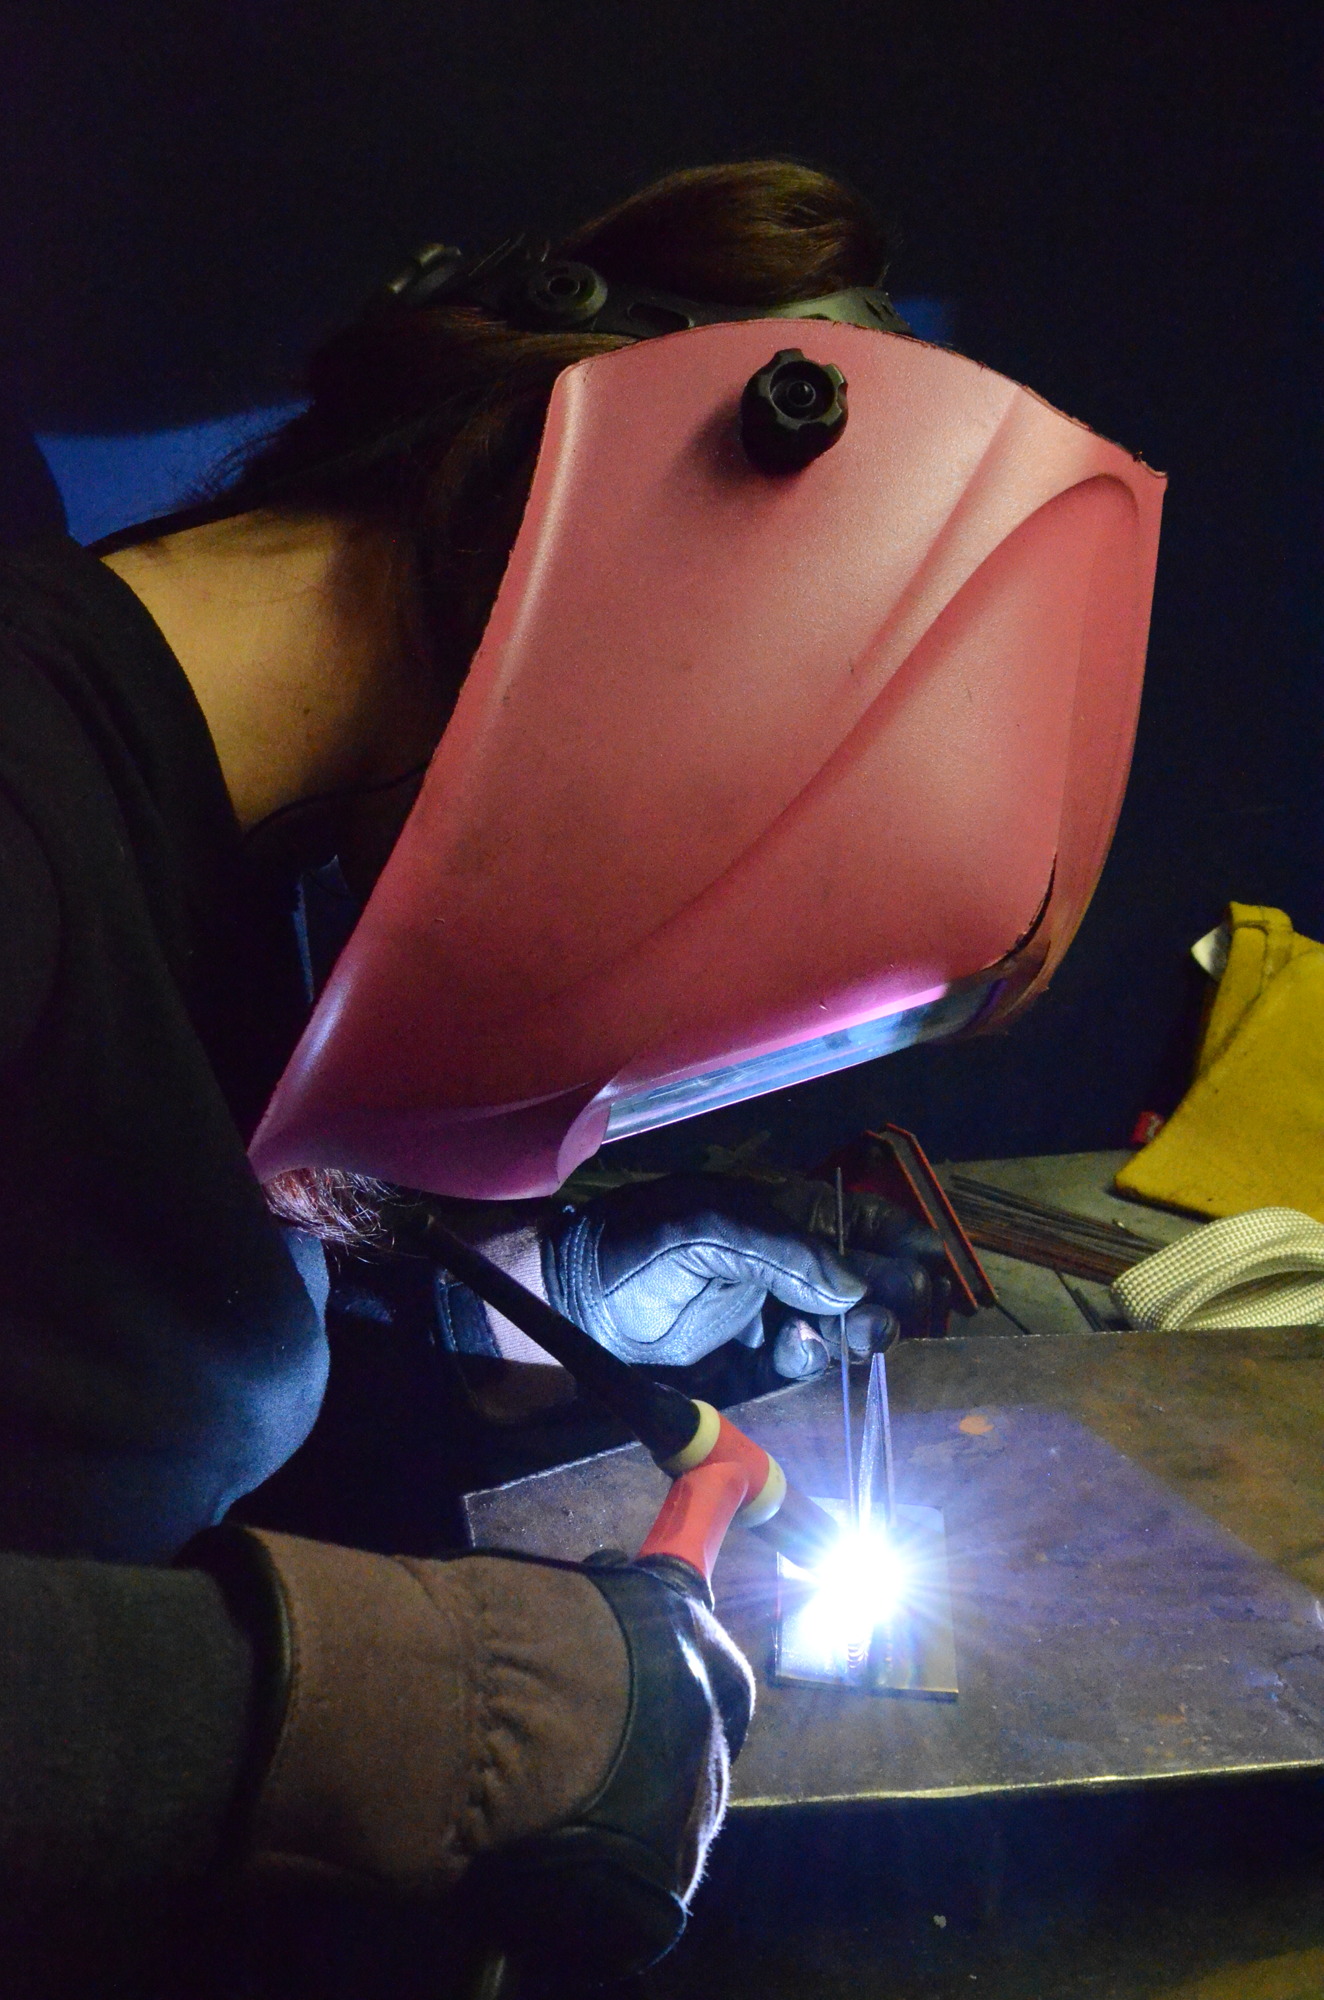 Madeline Slater, who will graduate from Westside College's welding course in May, performs the TIG (tungsten inert gas) welding method.